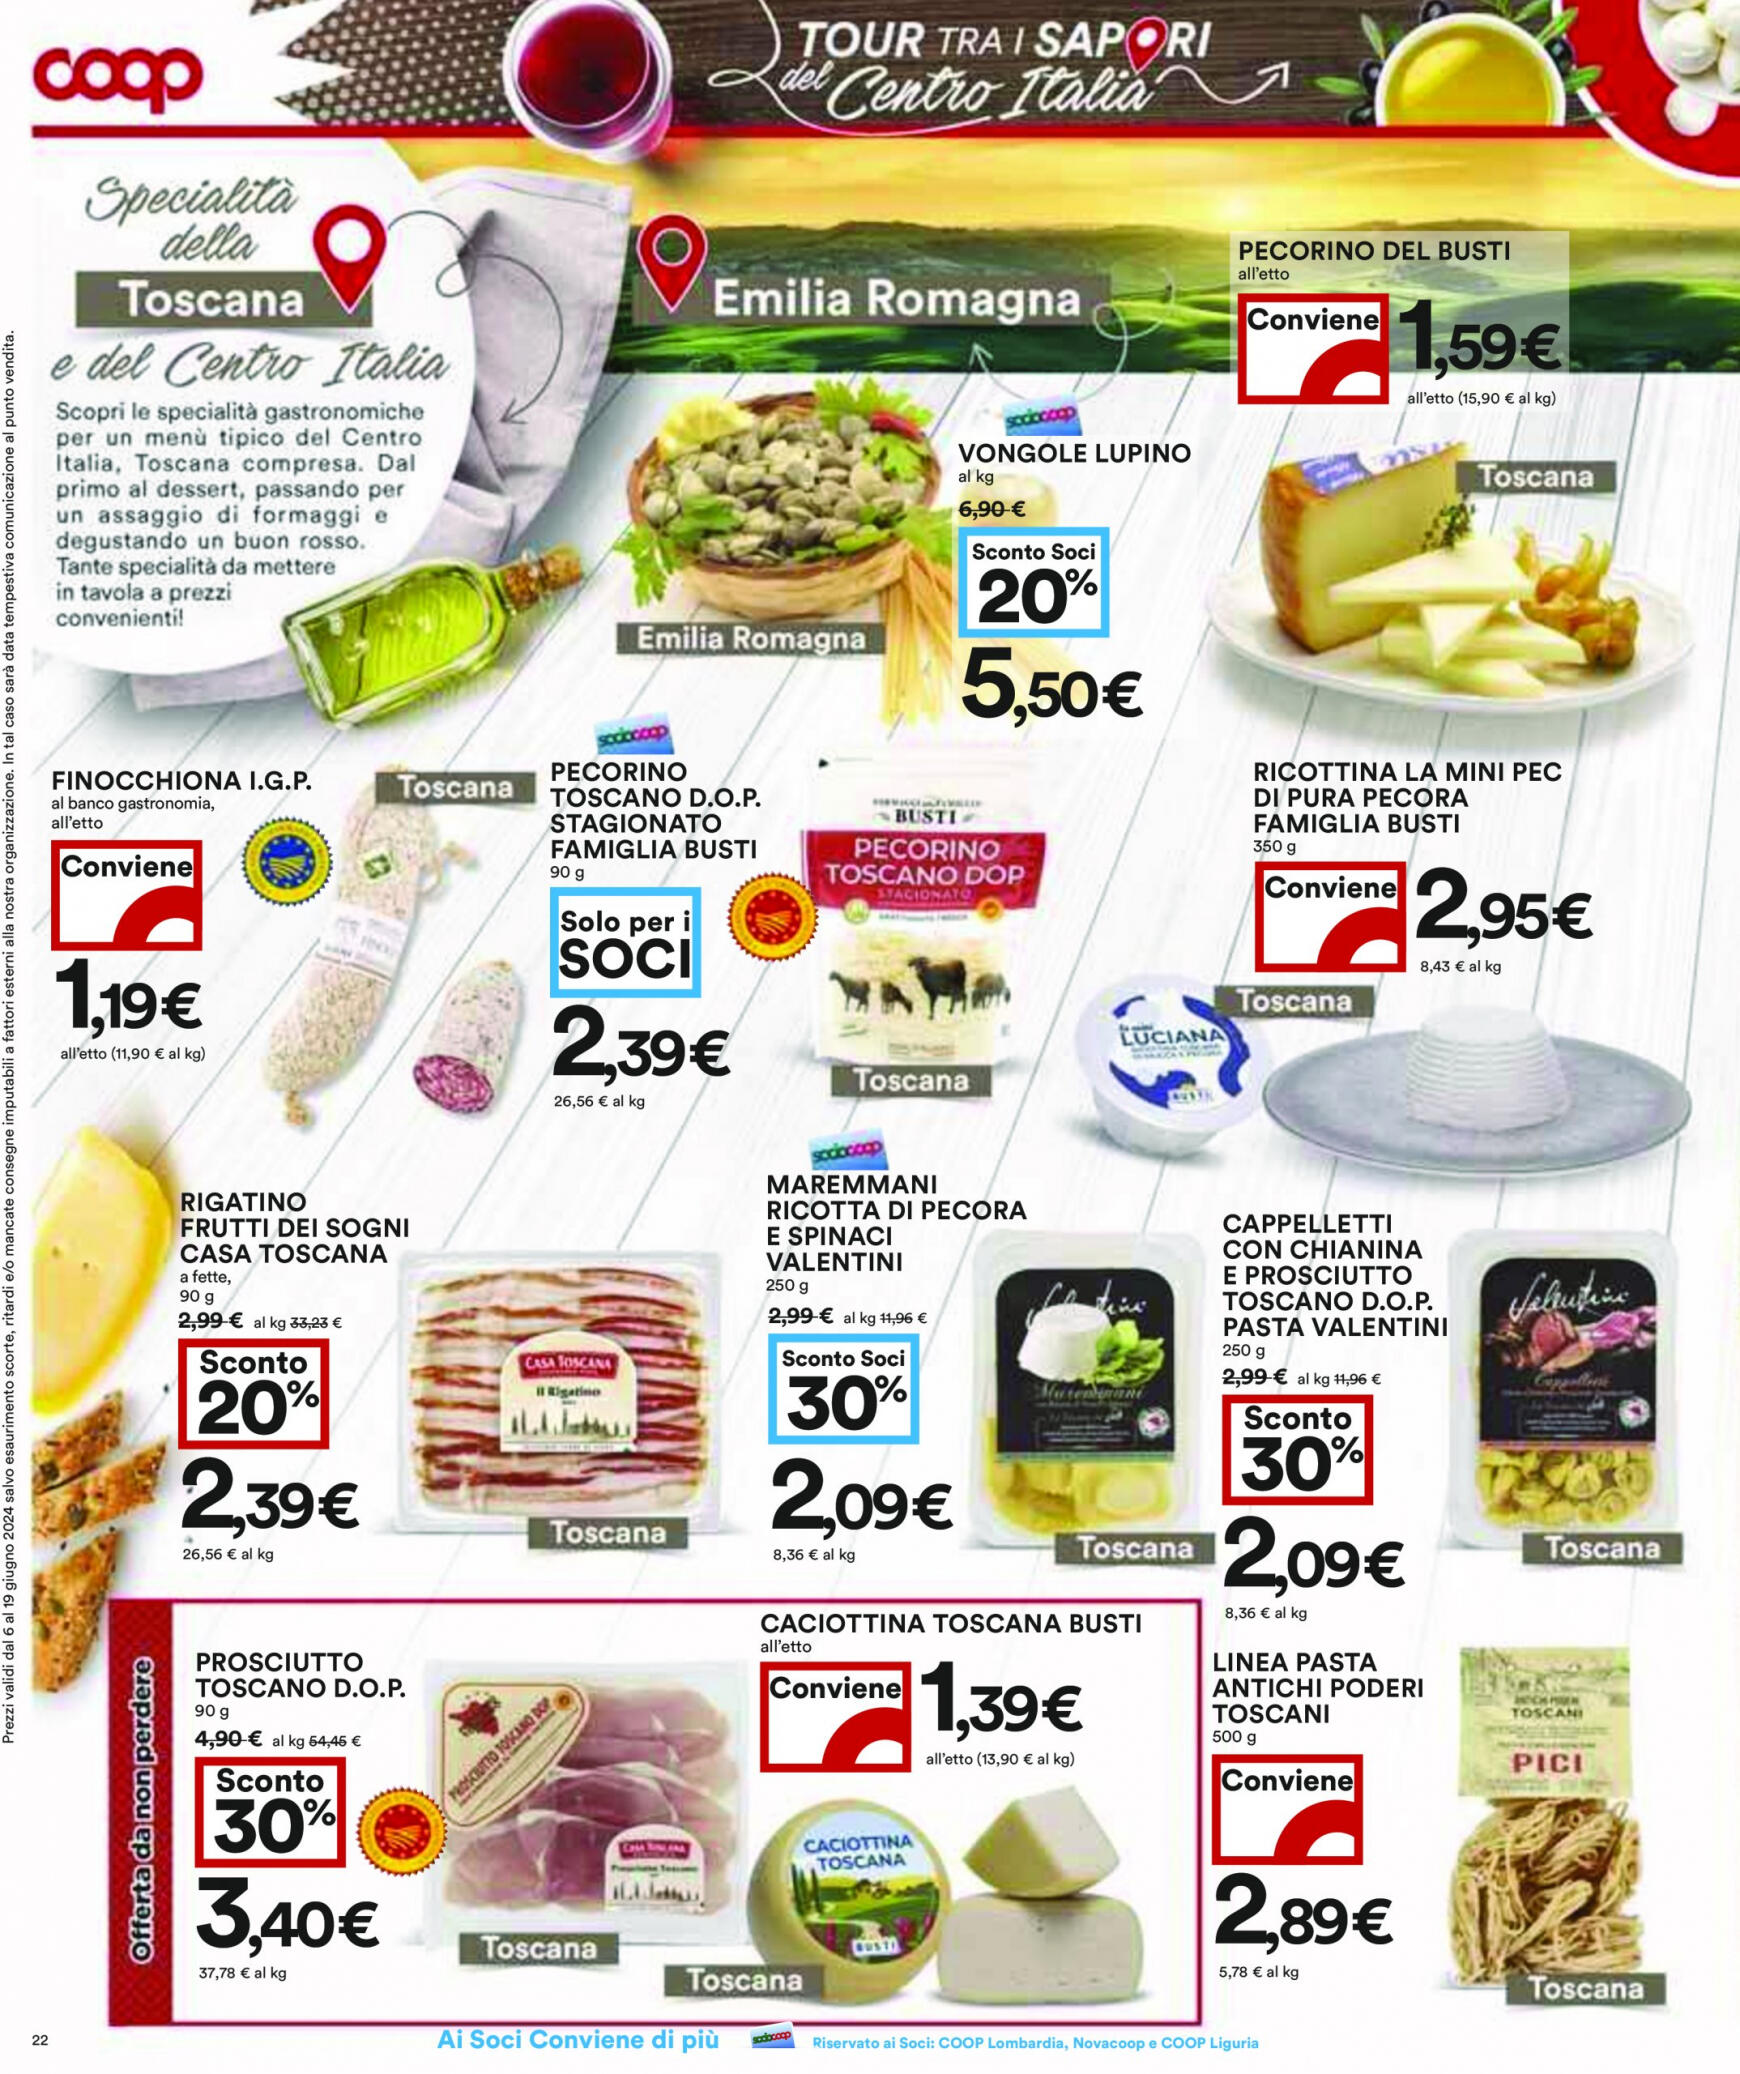 coop - Nuovo volantino Coop 10.06. - 19.06. - page: 22